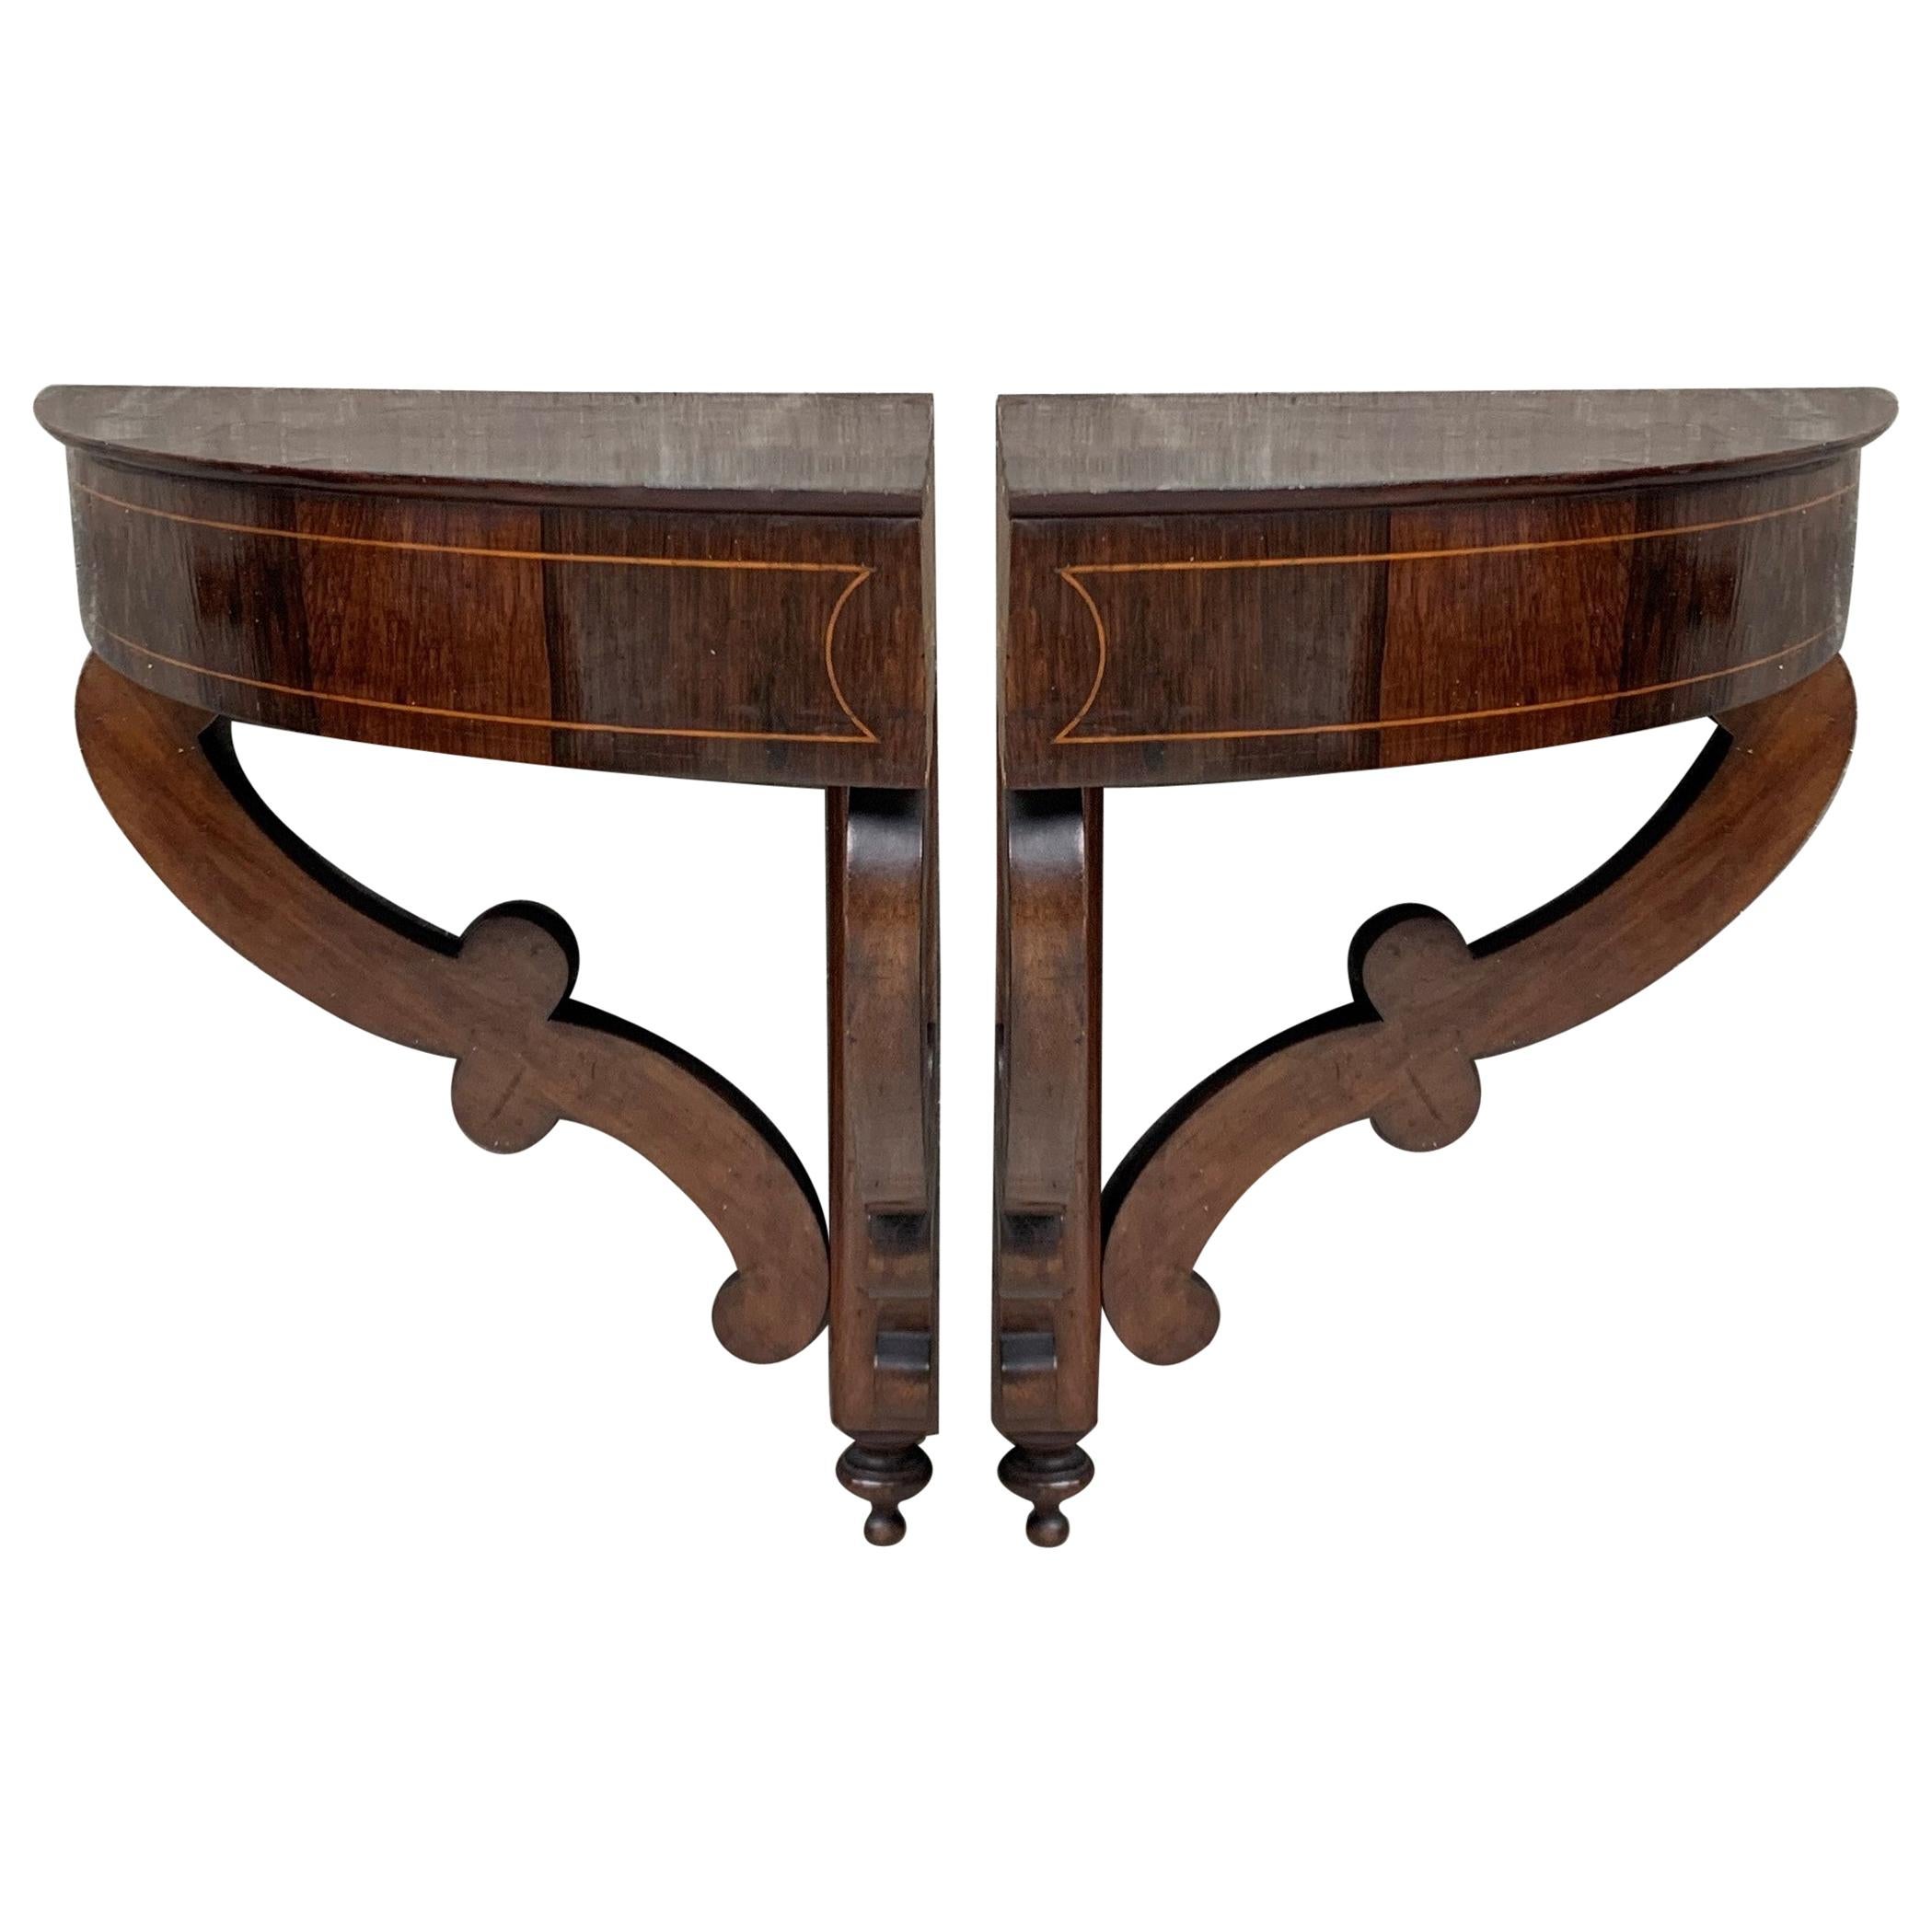 Pair of French Biedermeier Style Corner Walnut Wall-Mounted Consoles